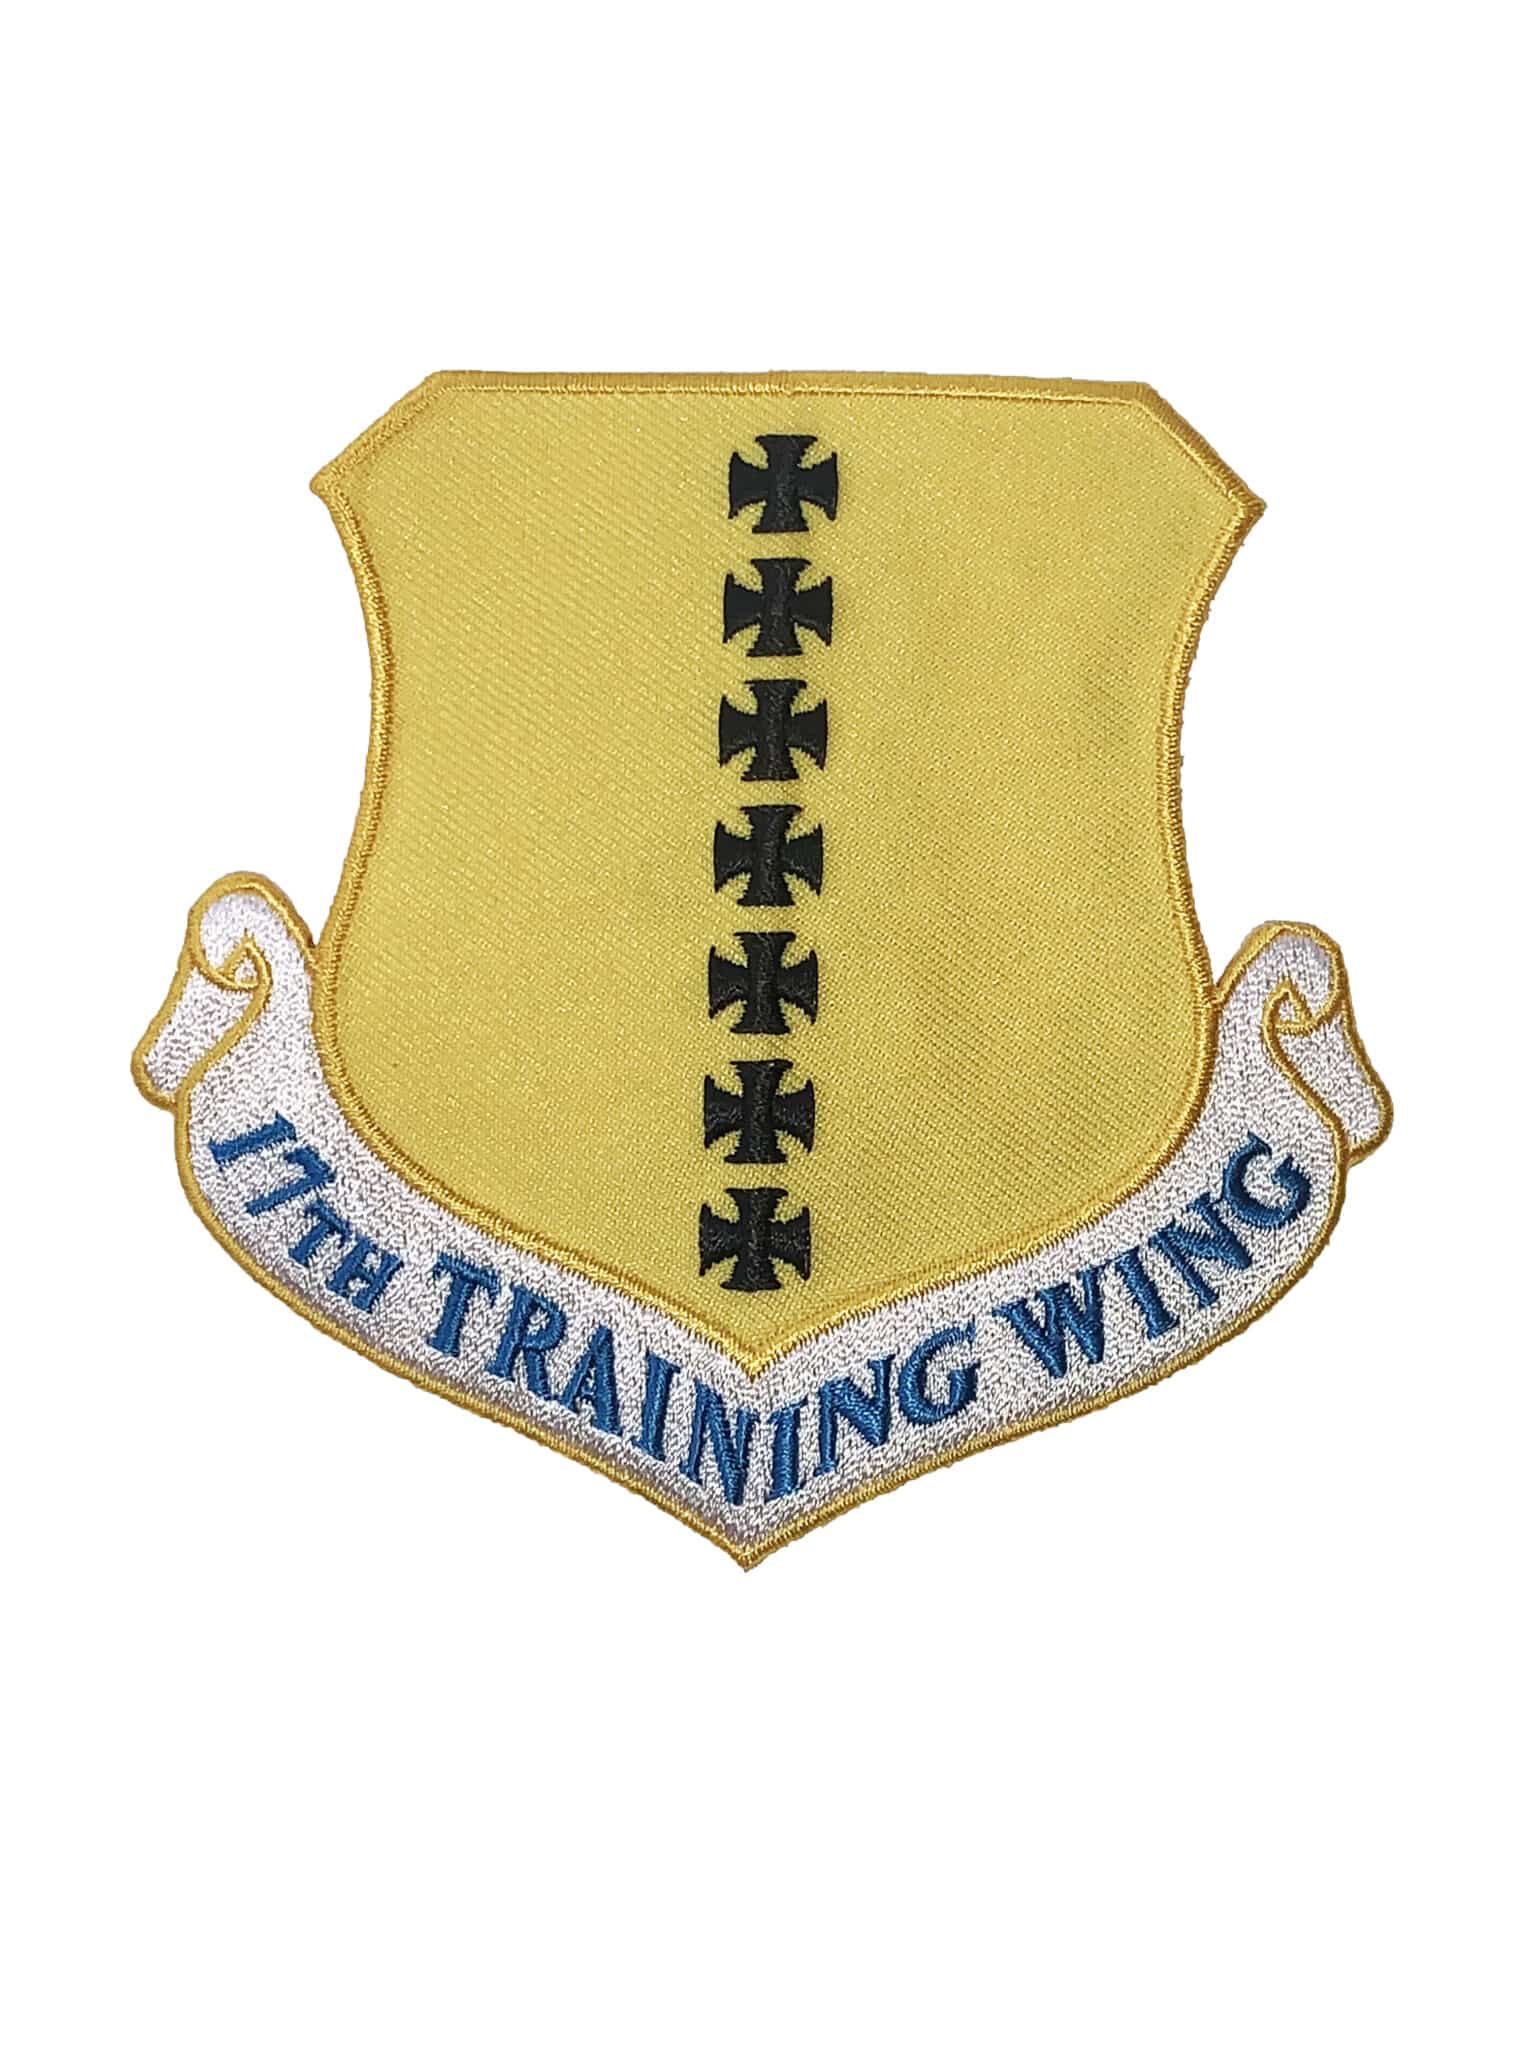 17th Flying Training Wing Patch – Plastic Backing